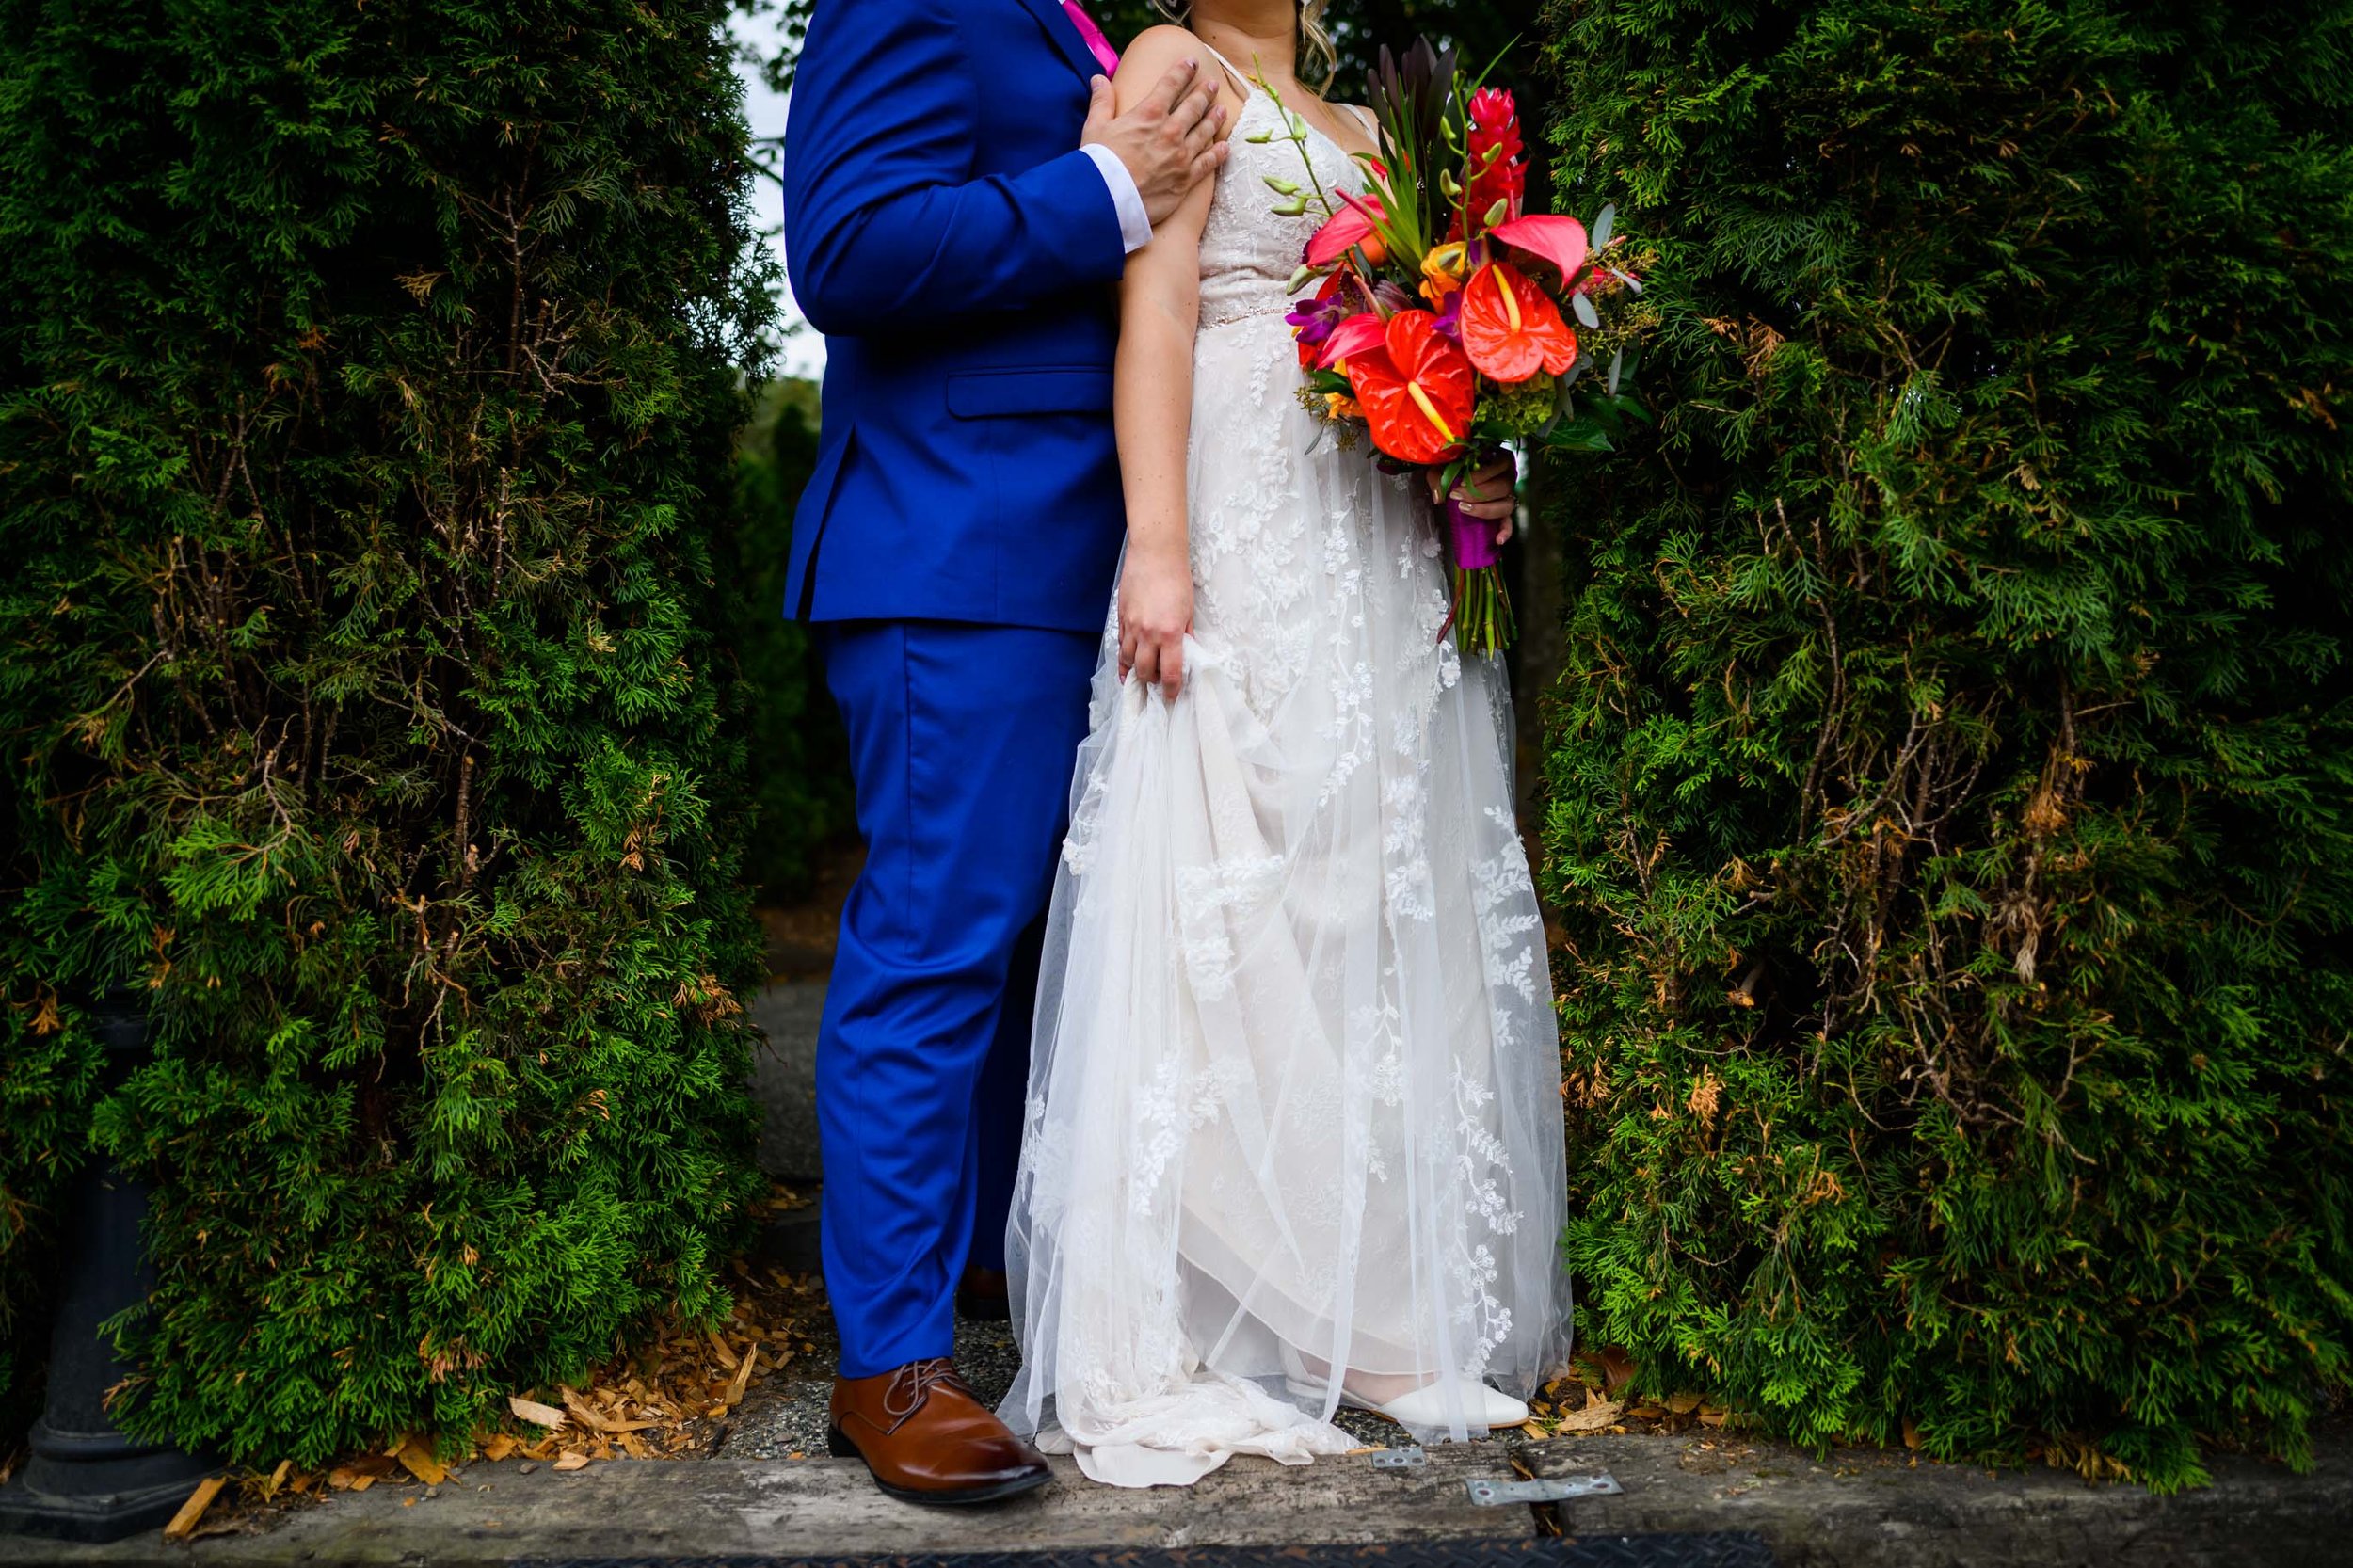 troutdale house wedding photo 21.JPG